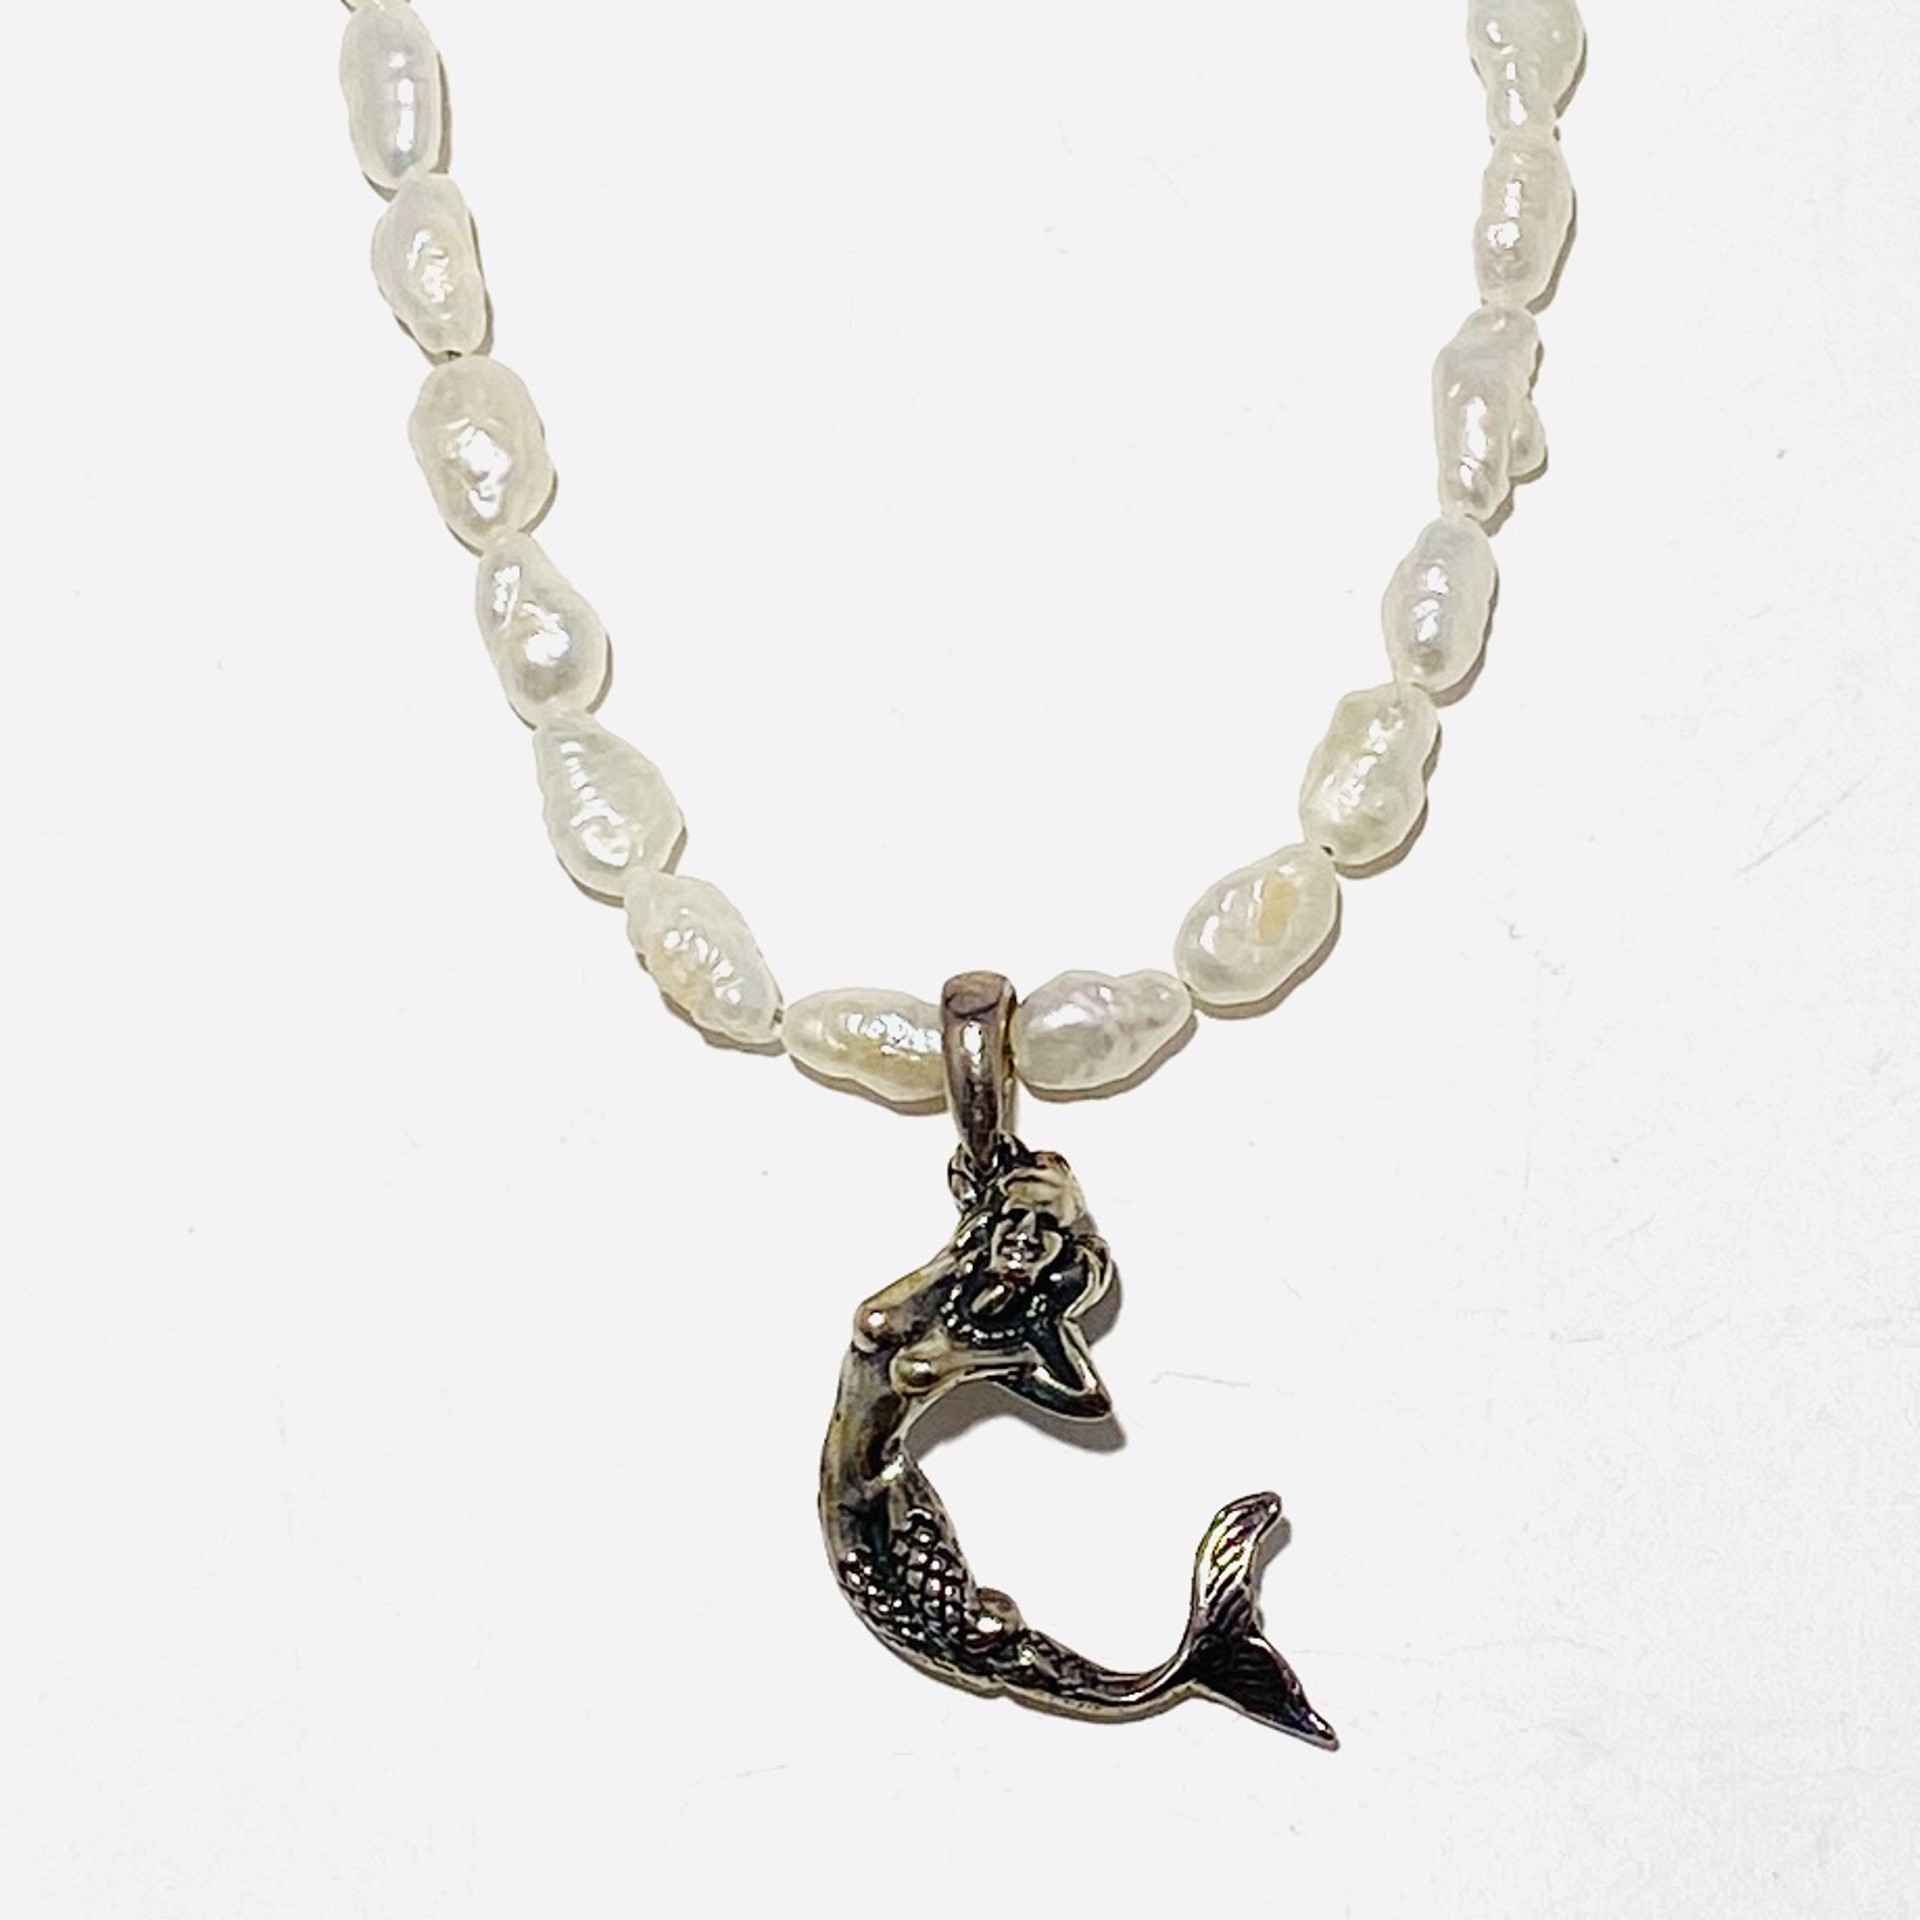 End to End Baroque Pearl Sterling Mermaid Charm Necklace by Nance Trueworthy